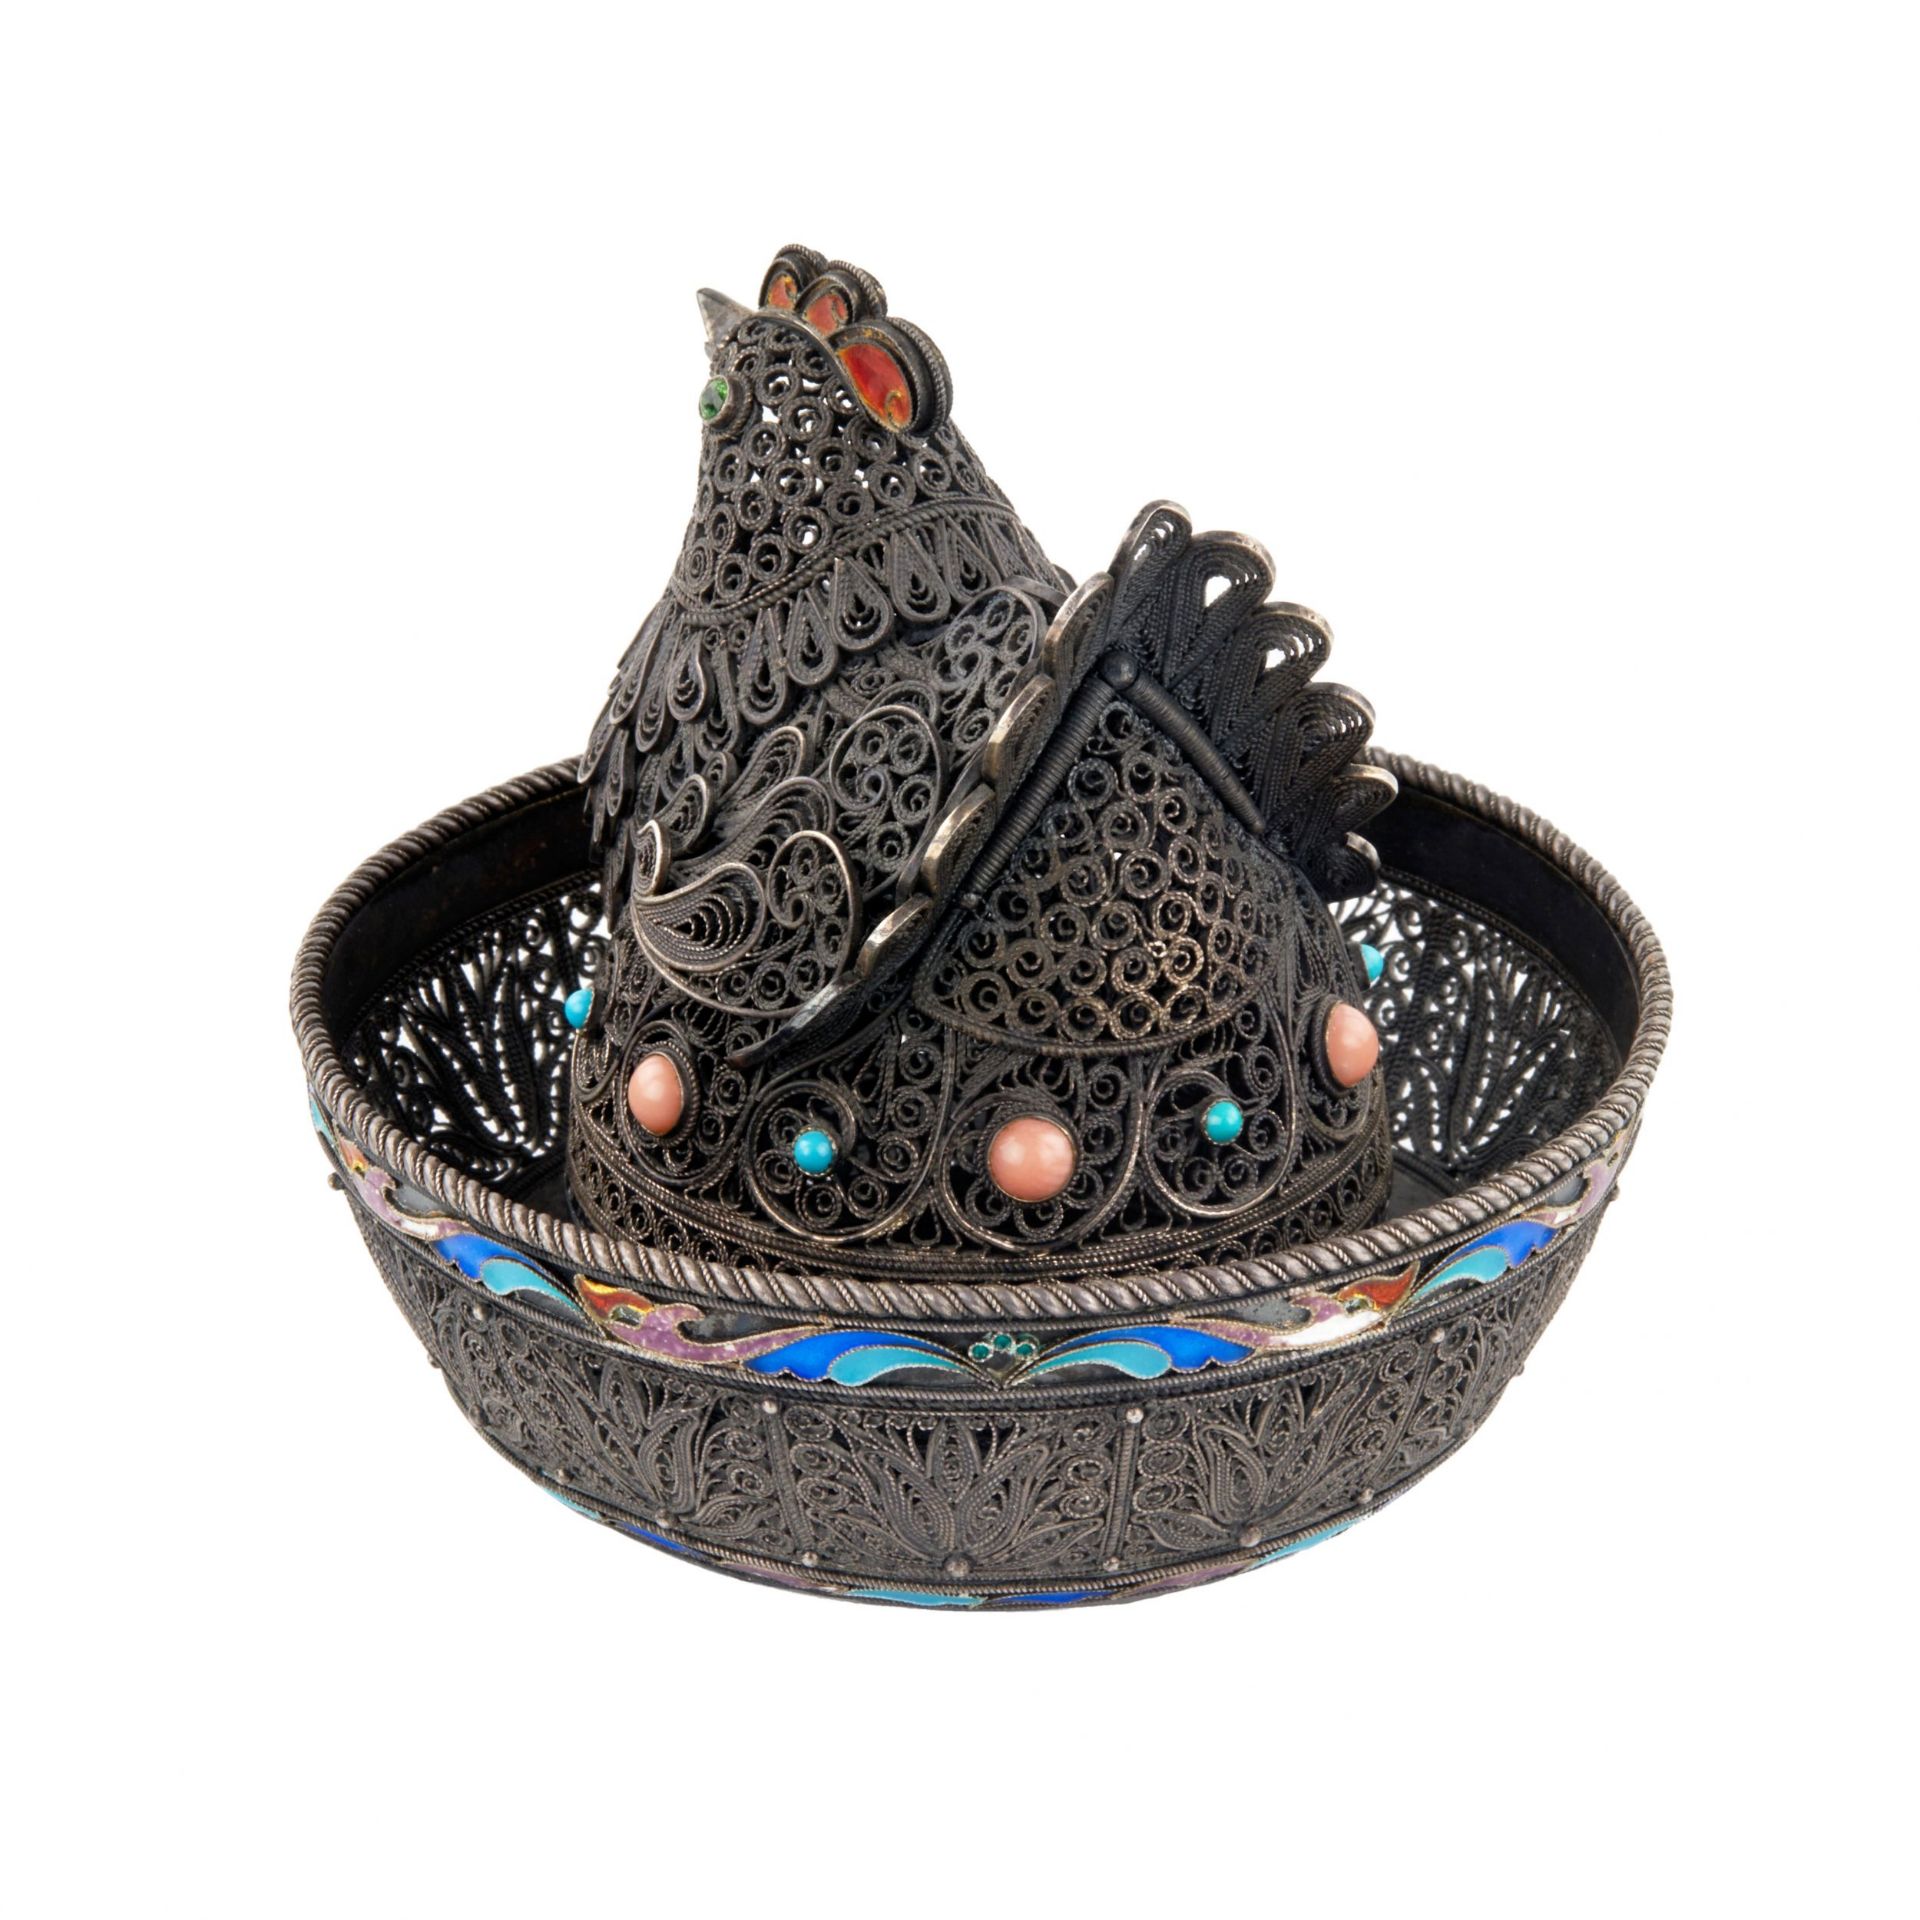 Easter plow pot made of silver with enamel - Hen. - Image 4 of 7